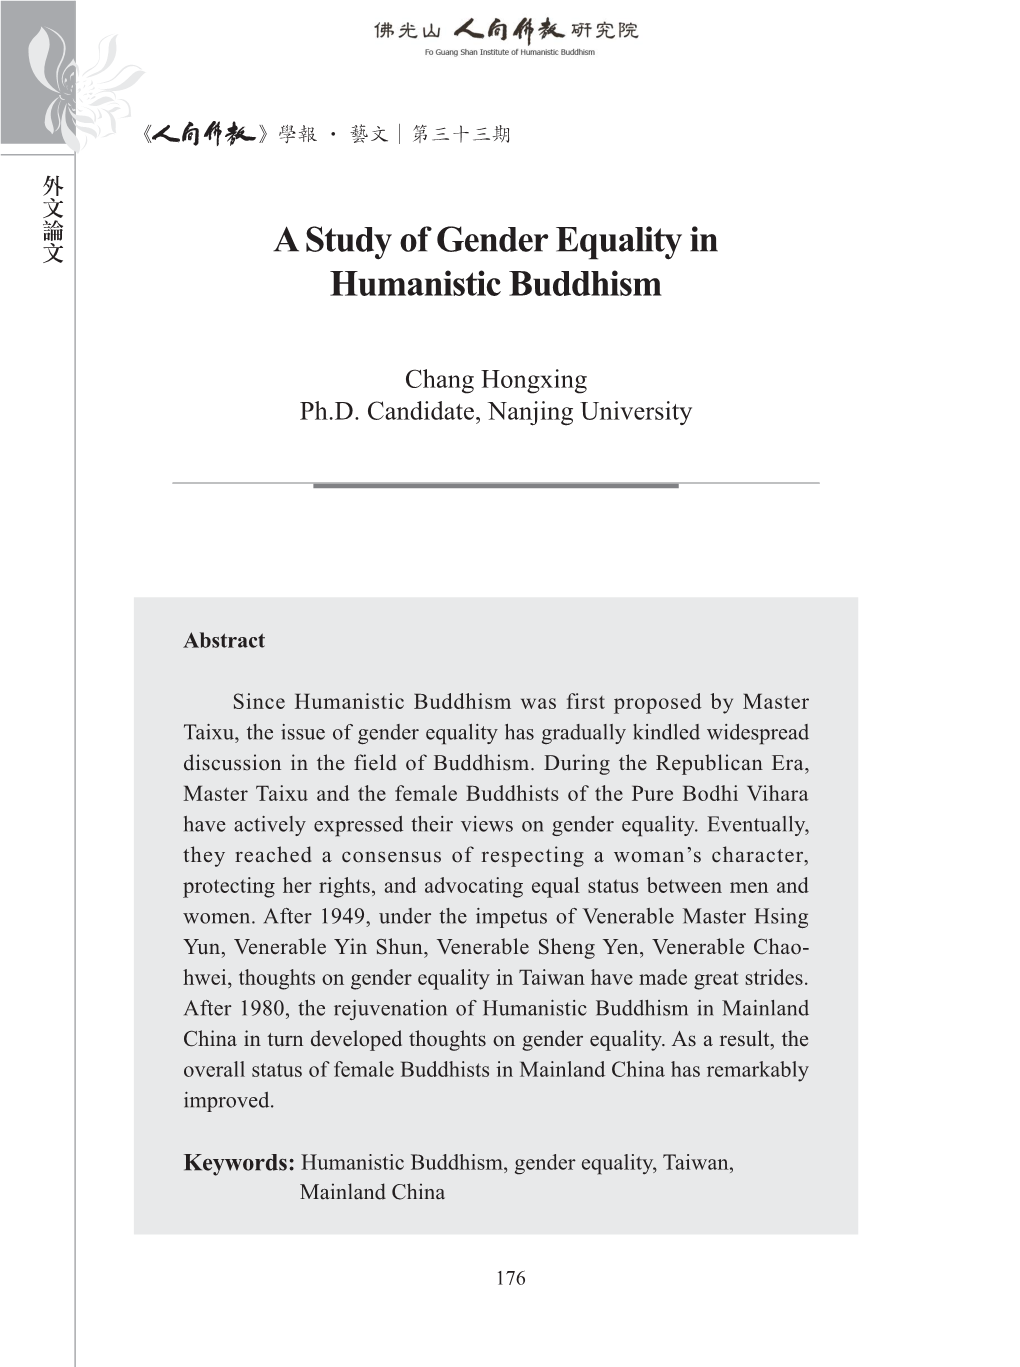 A Study of Gender Equality in Humanistic Buddhism